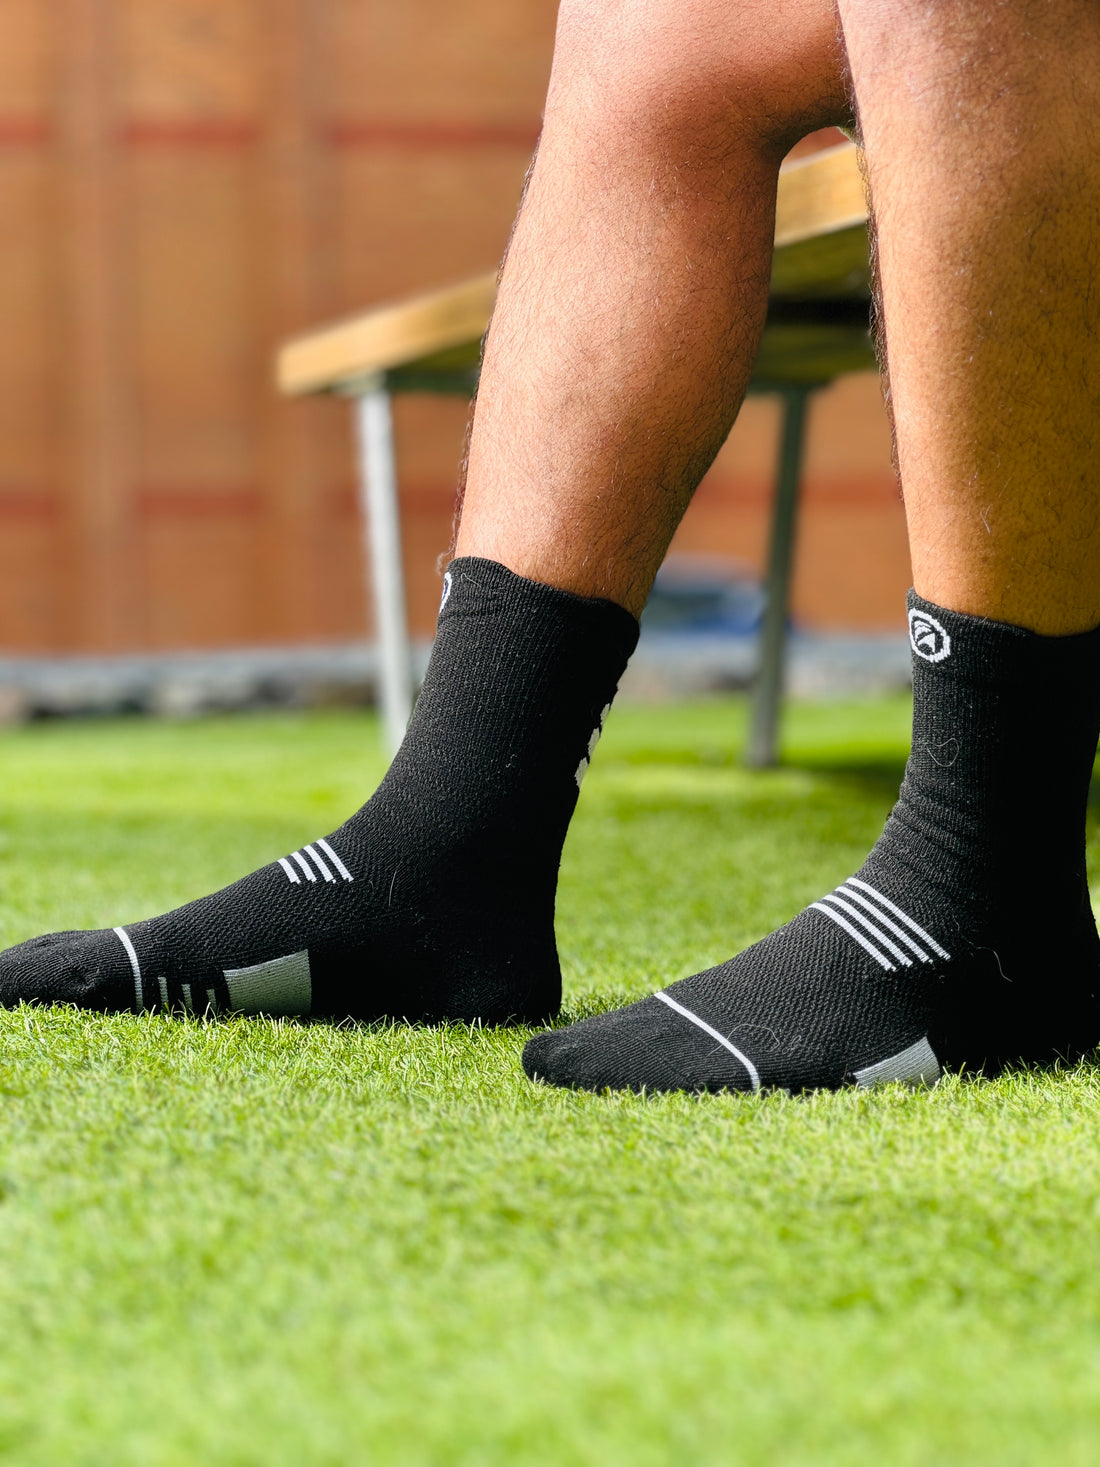 Image of FitKnit compression socks providing comfort and support for improved foot health and reduced discomfort.